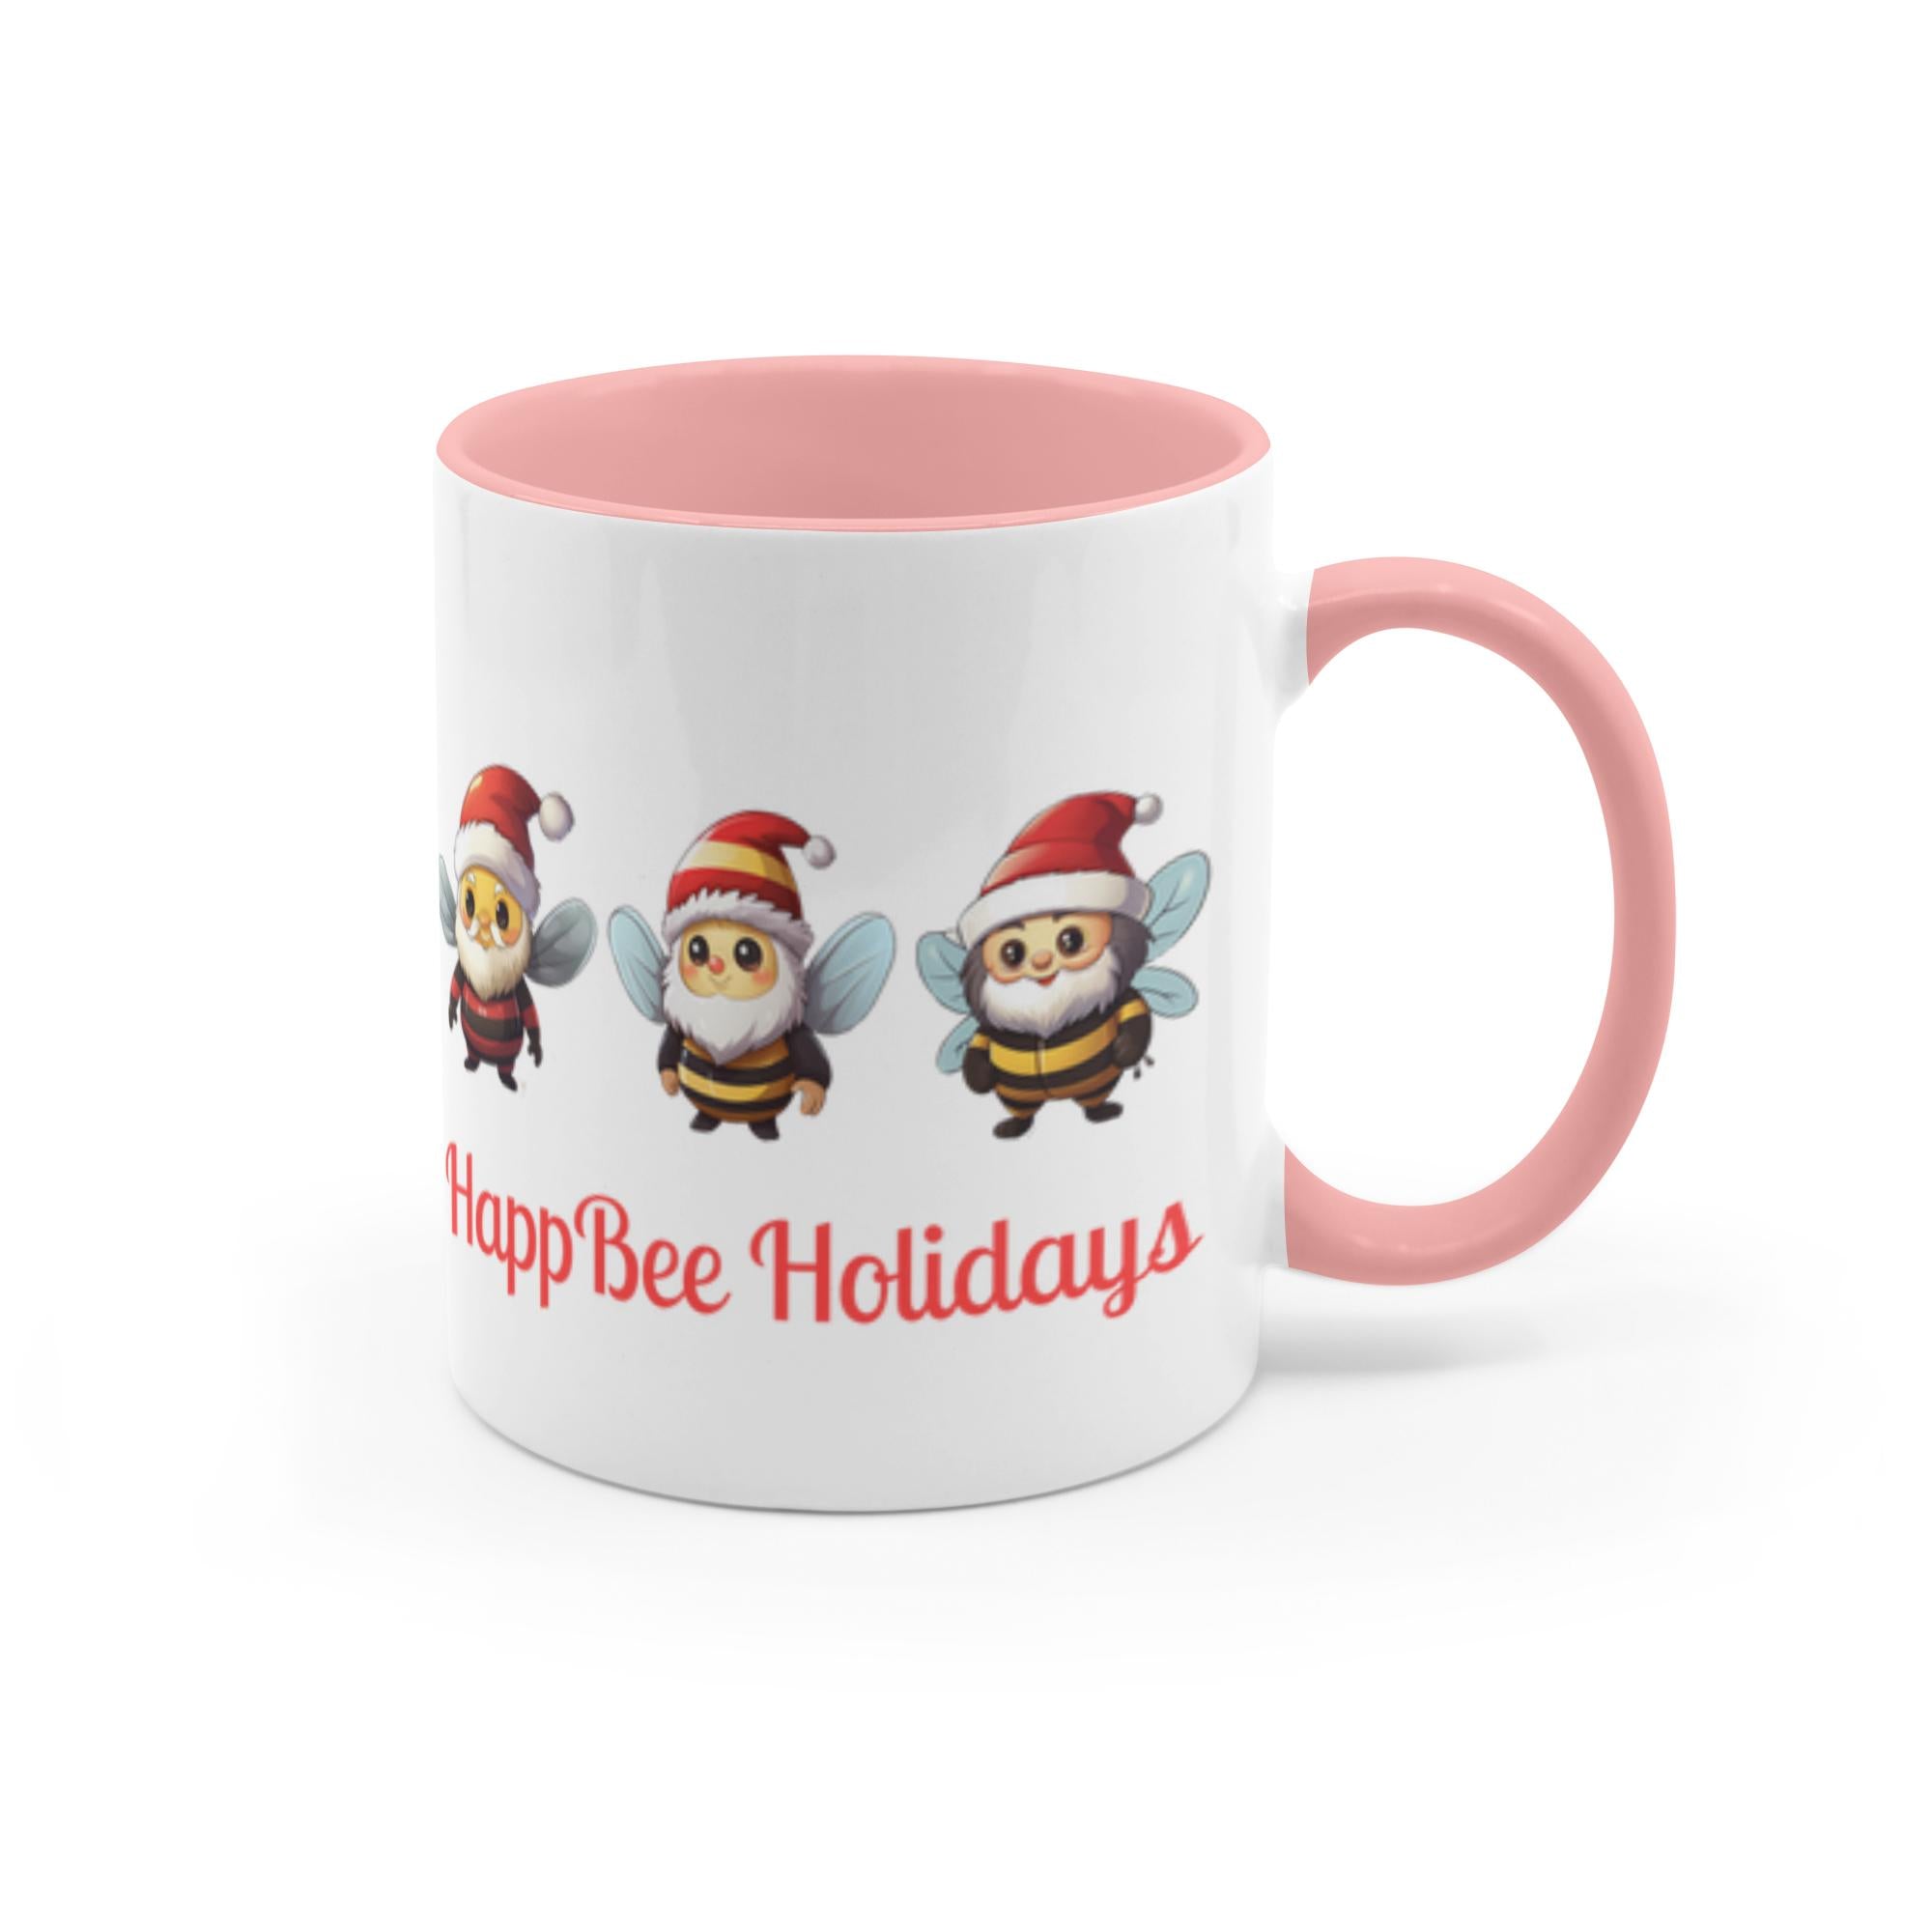 HappBee Holidays 11 oz. Accent Mug 11 oz White with Pink Accents Coffee & Tea Cups gifts holiday store